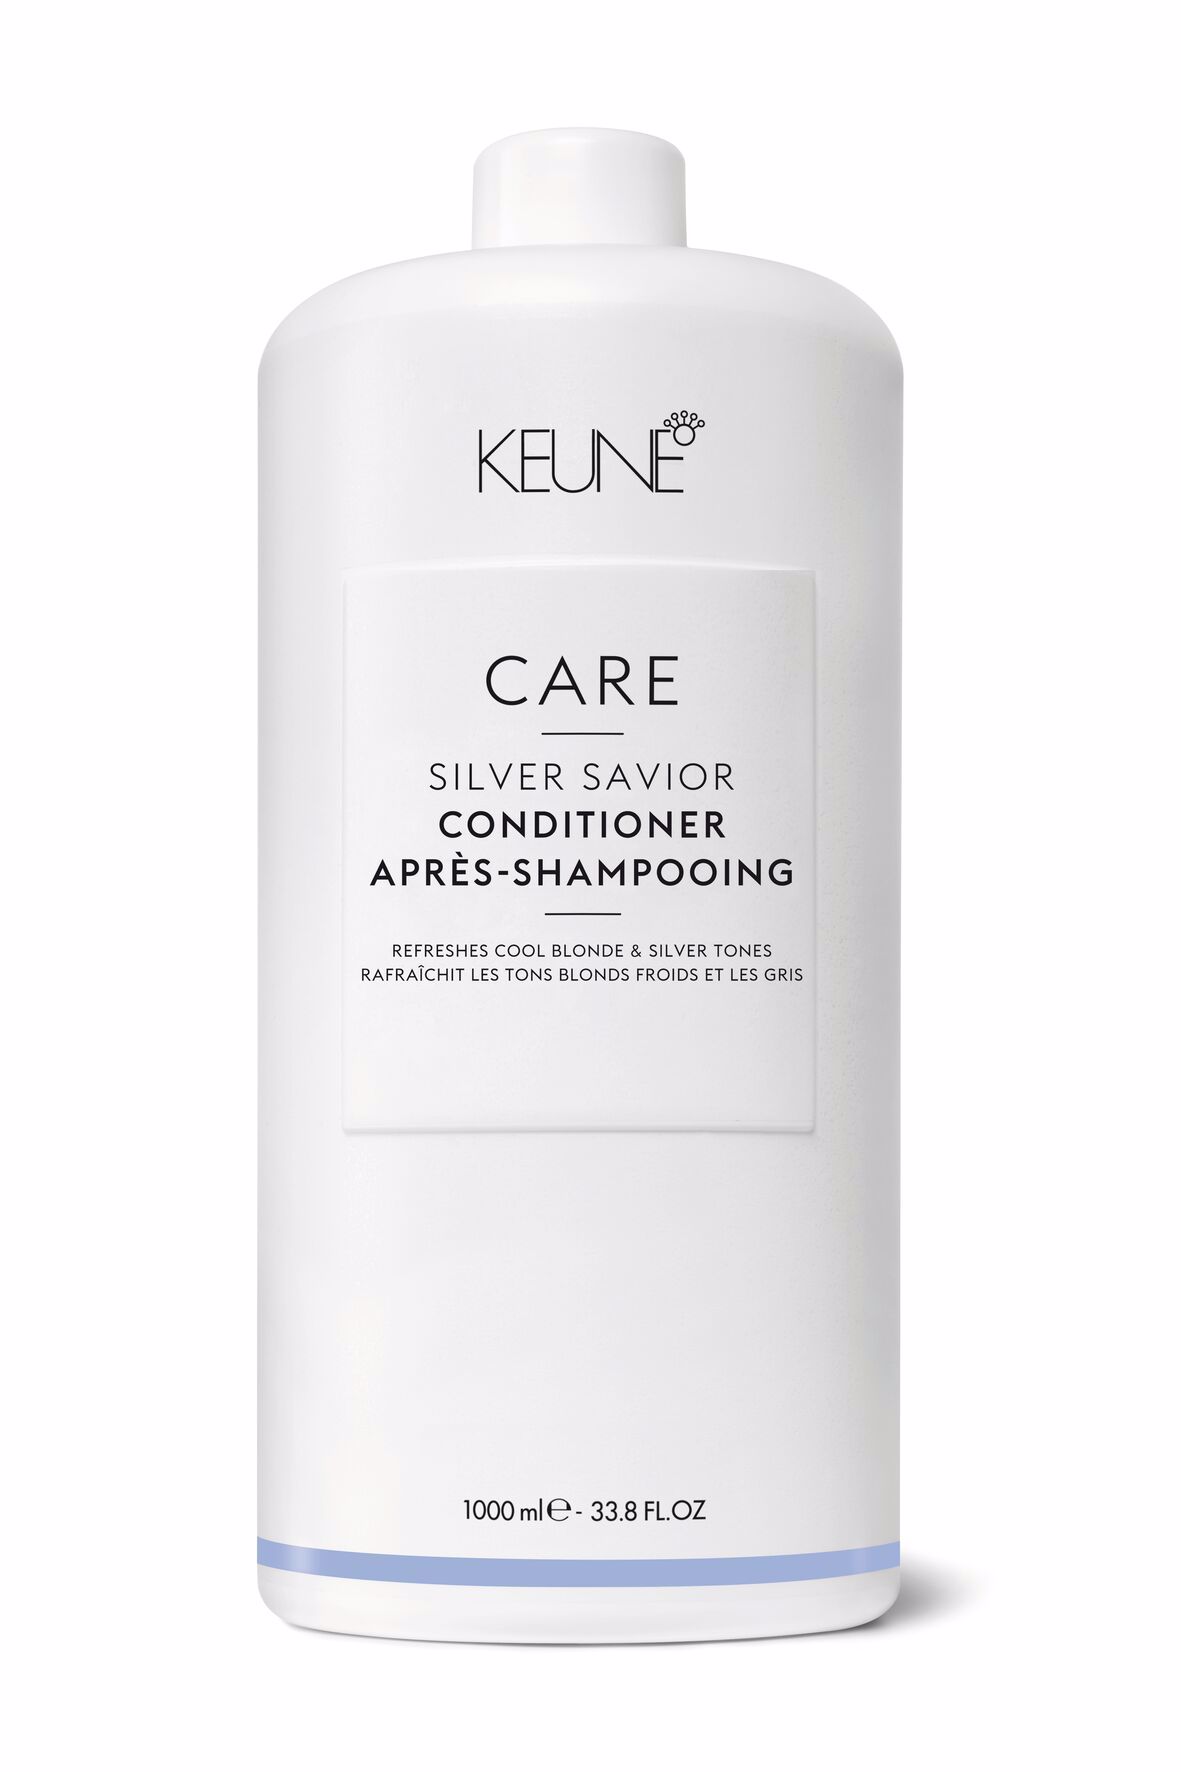 Our Care Silver Savior Conditioner for blone hair contains violet pigments that neutralize copper and warm tones, while Provitamin B keeps the hair smooth and nourished. Keune.ch.